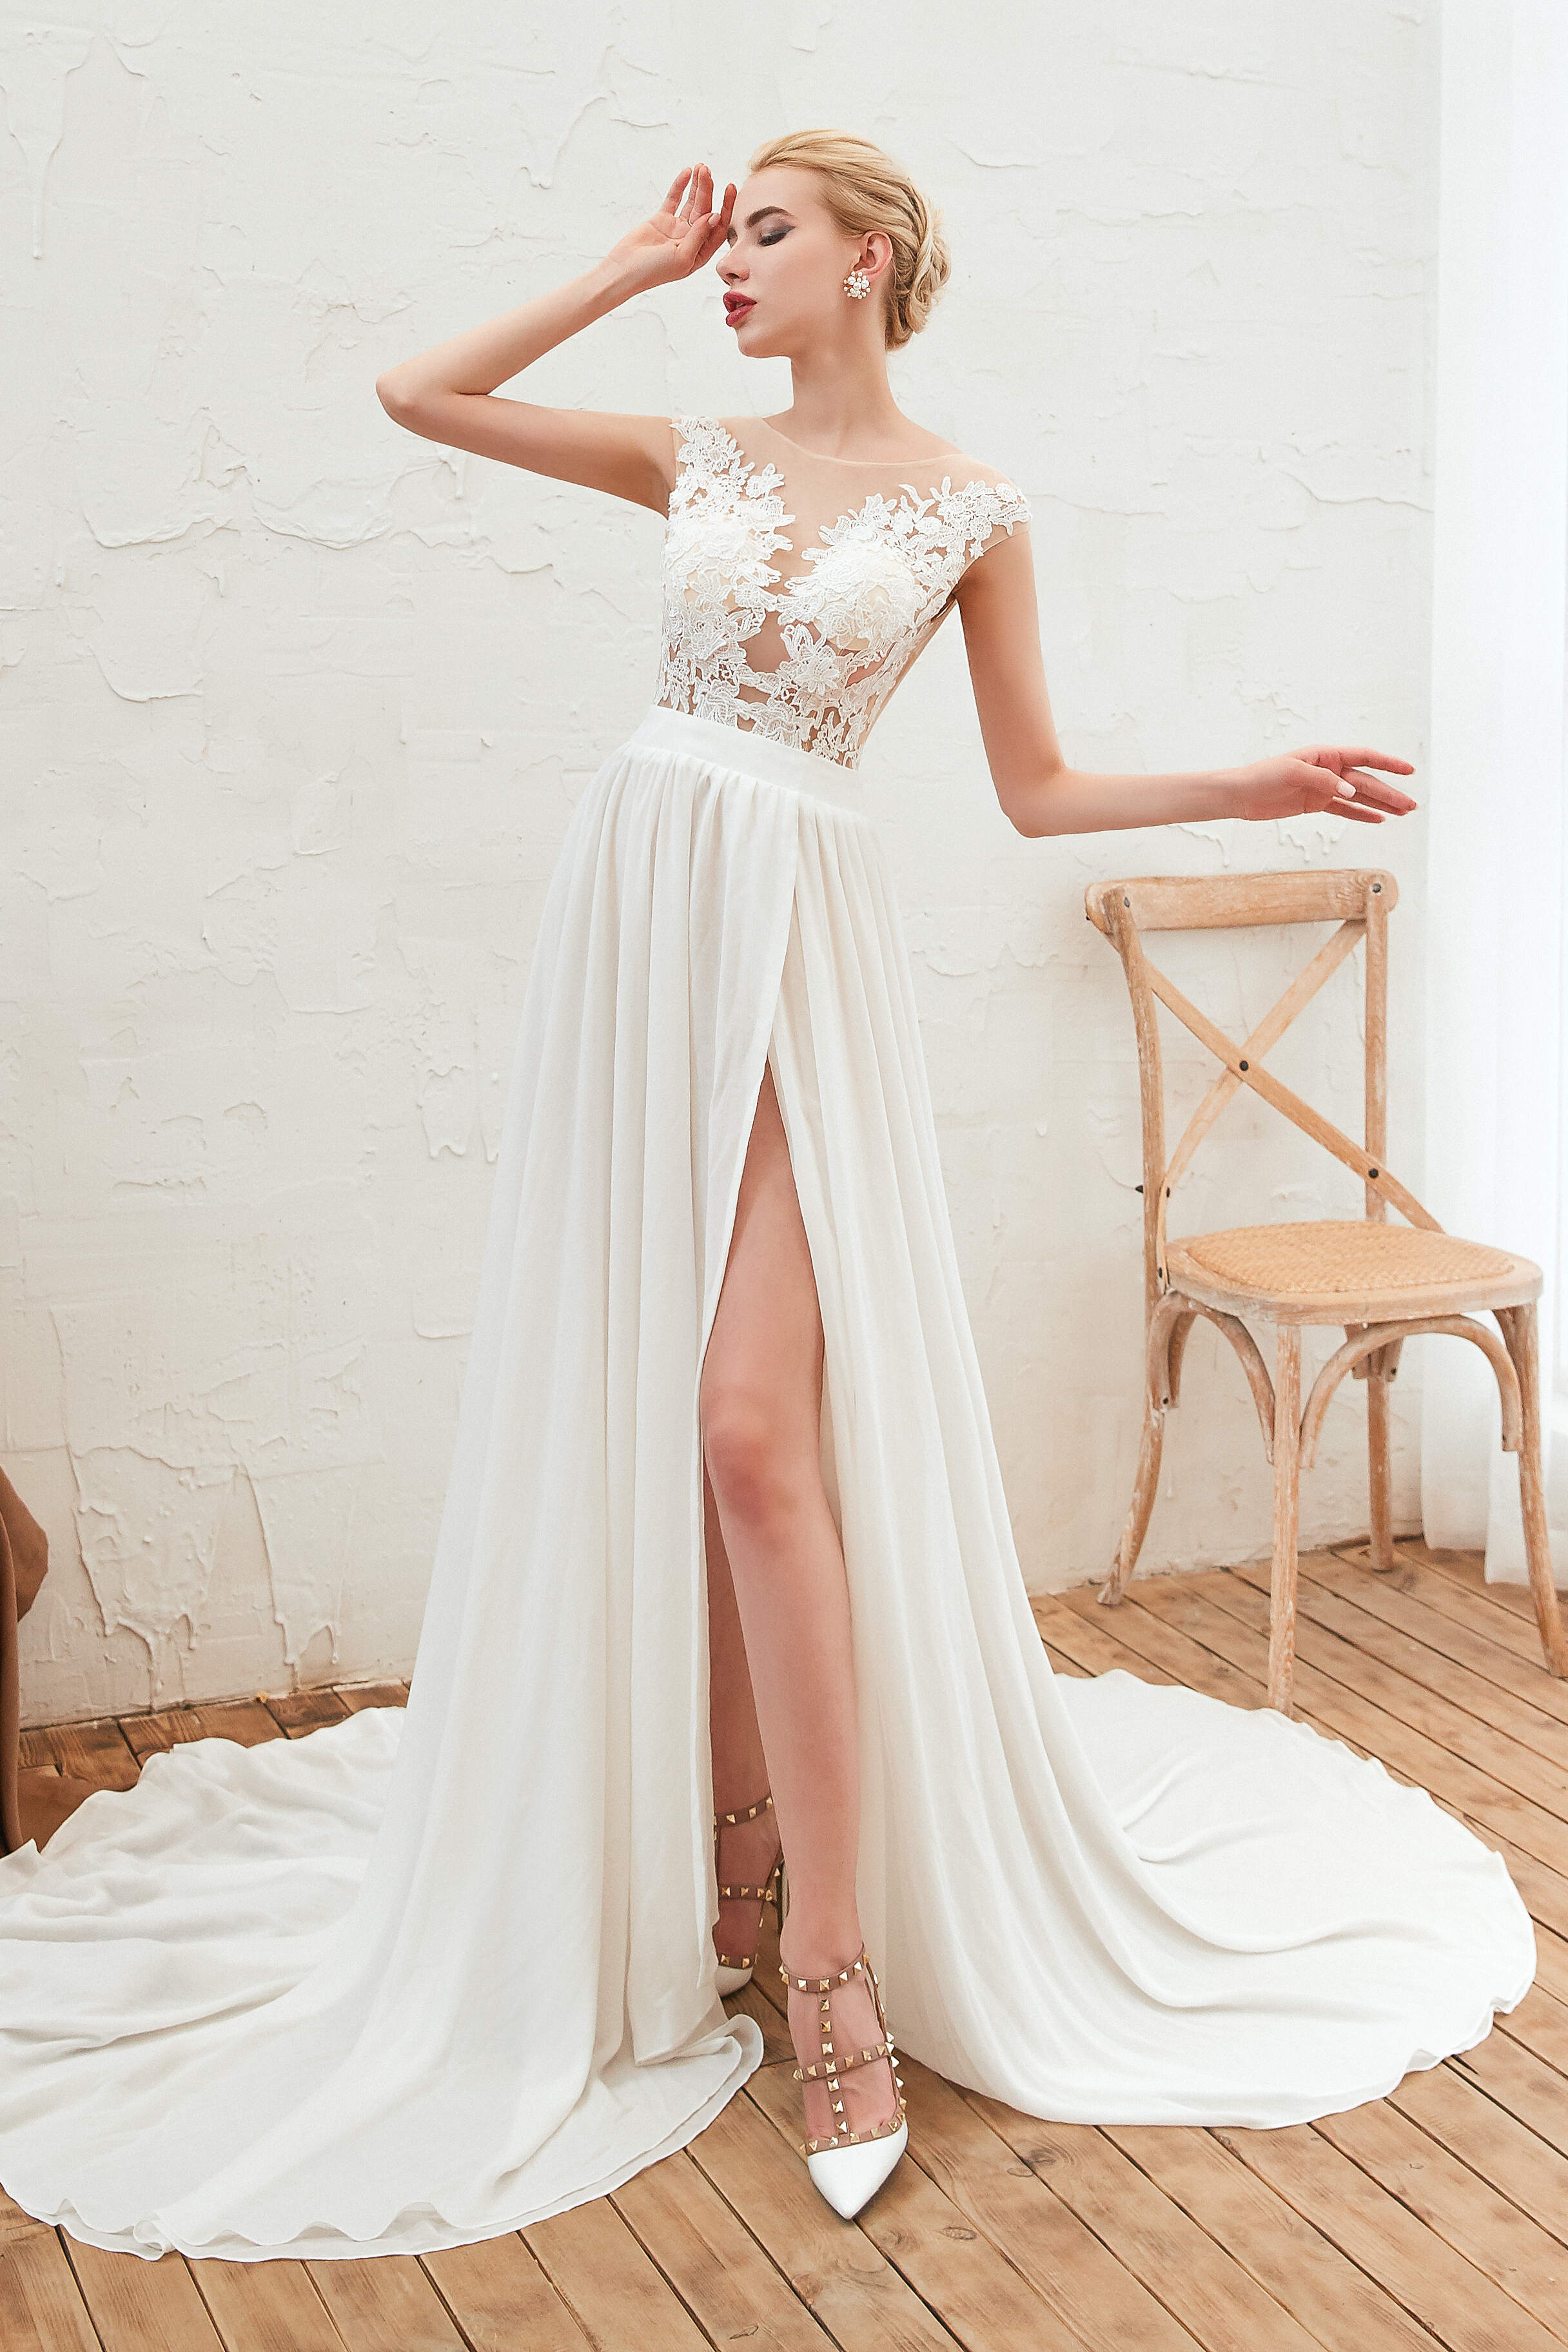 Neck Lace Top White Corset Wedding Dresses with Slit Gowns, Wedding Dress Chic